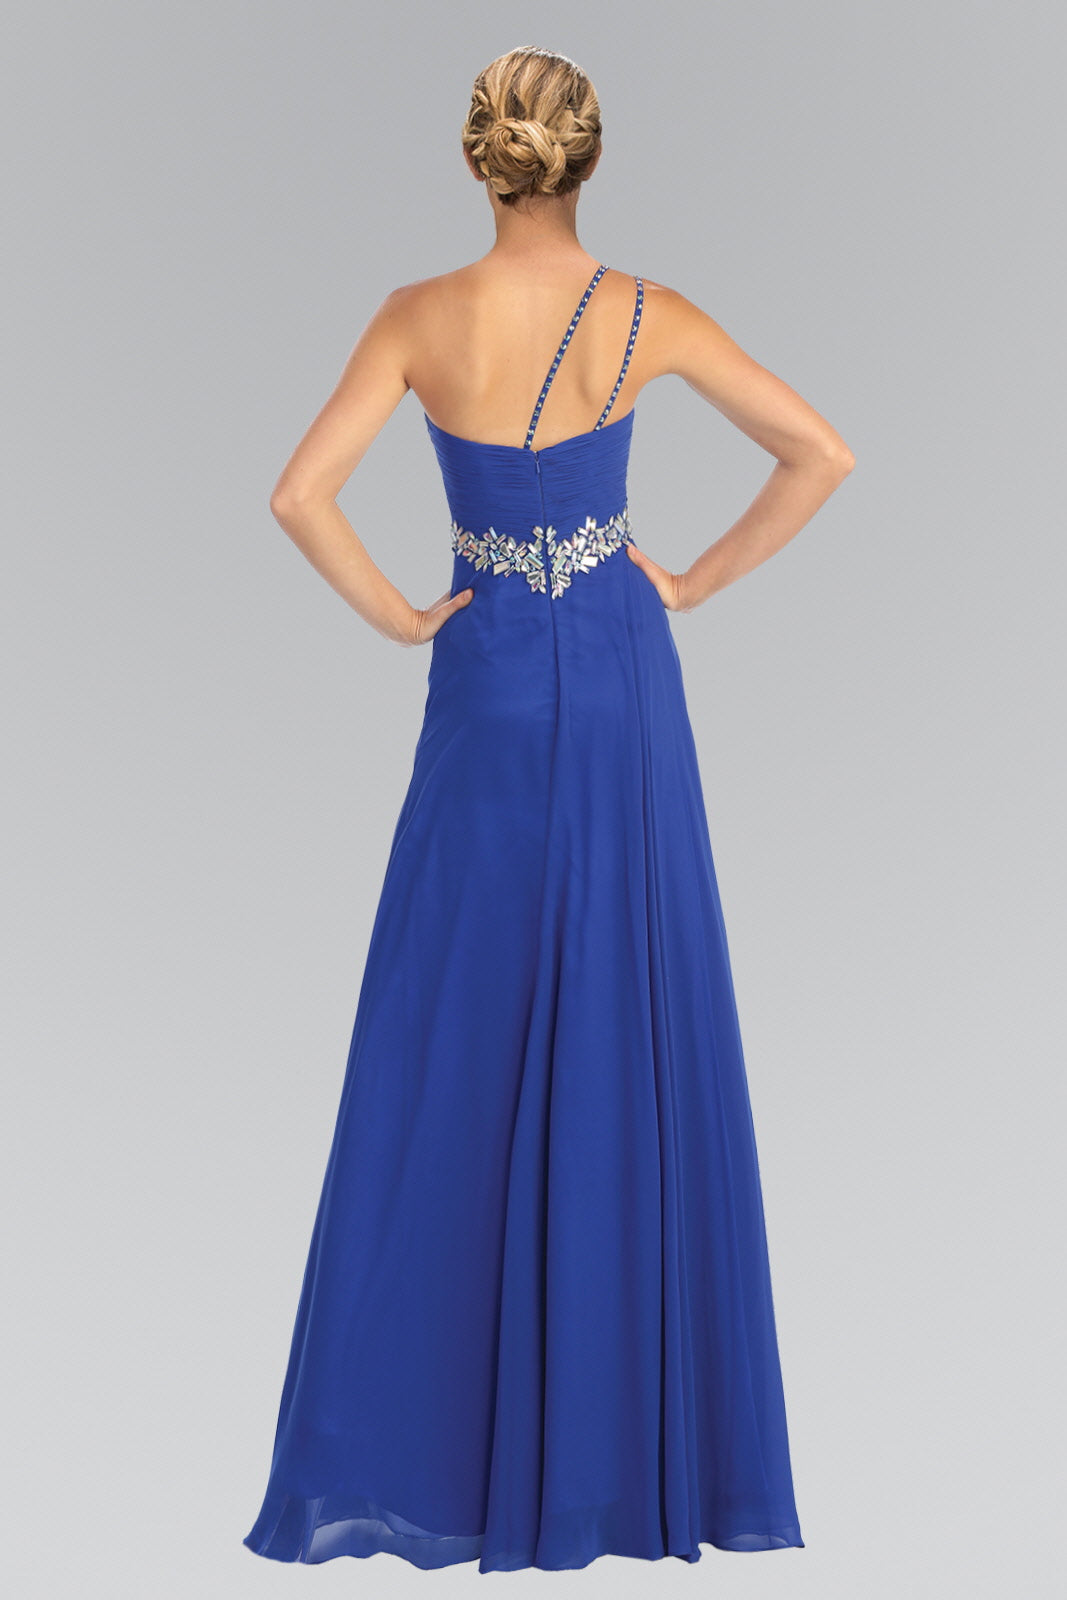 Empire One Shoulder Chiffon Long Dress Accented with Jewel GLGL1030 Elsy Style PROM